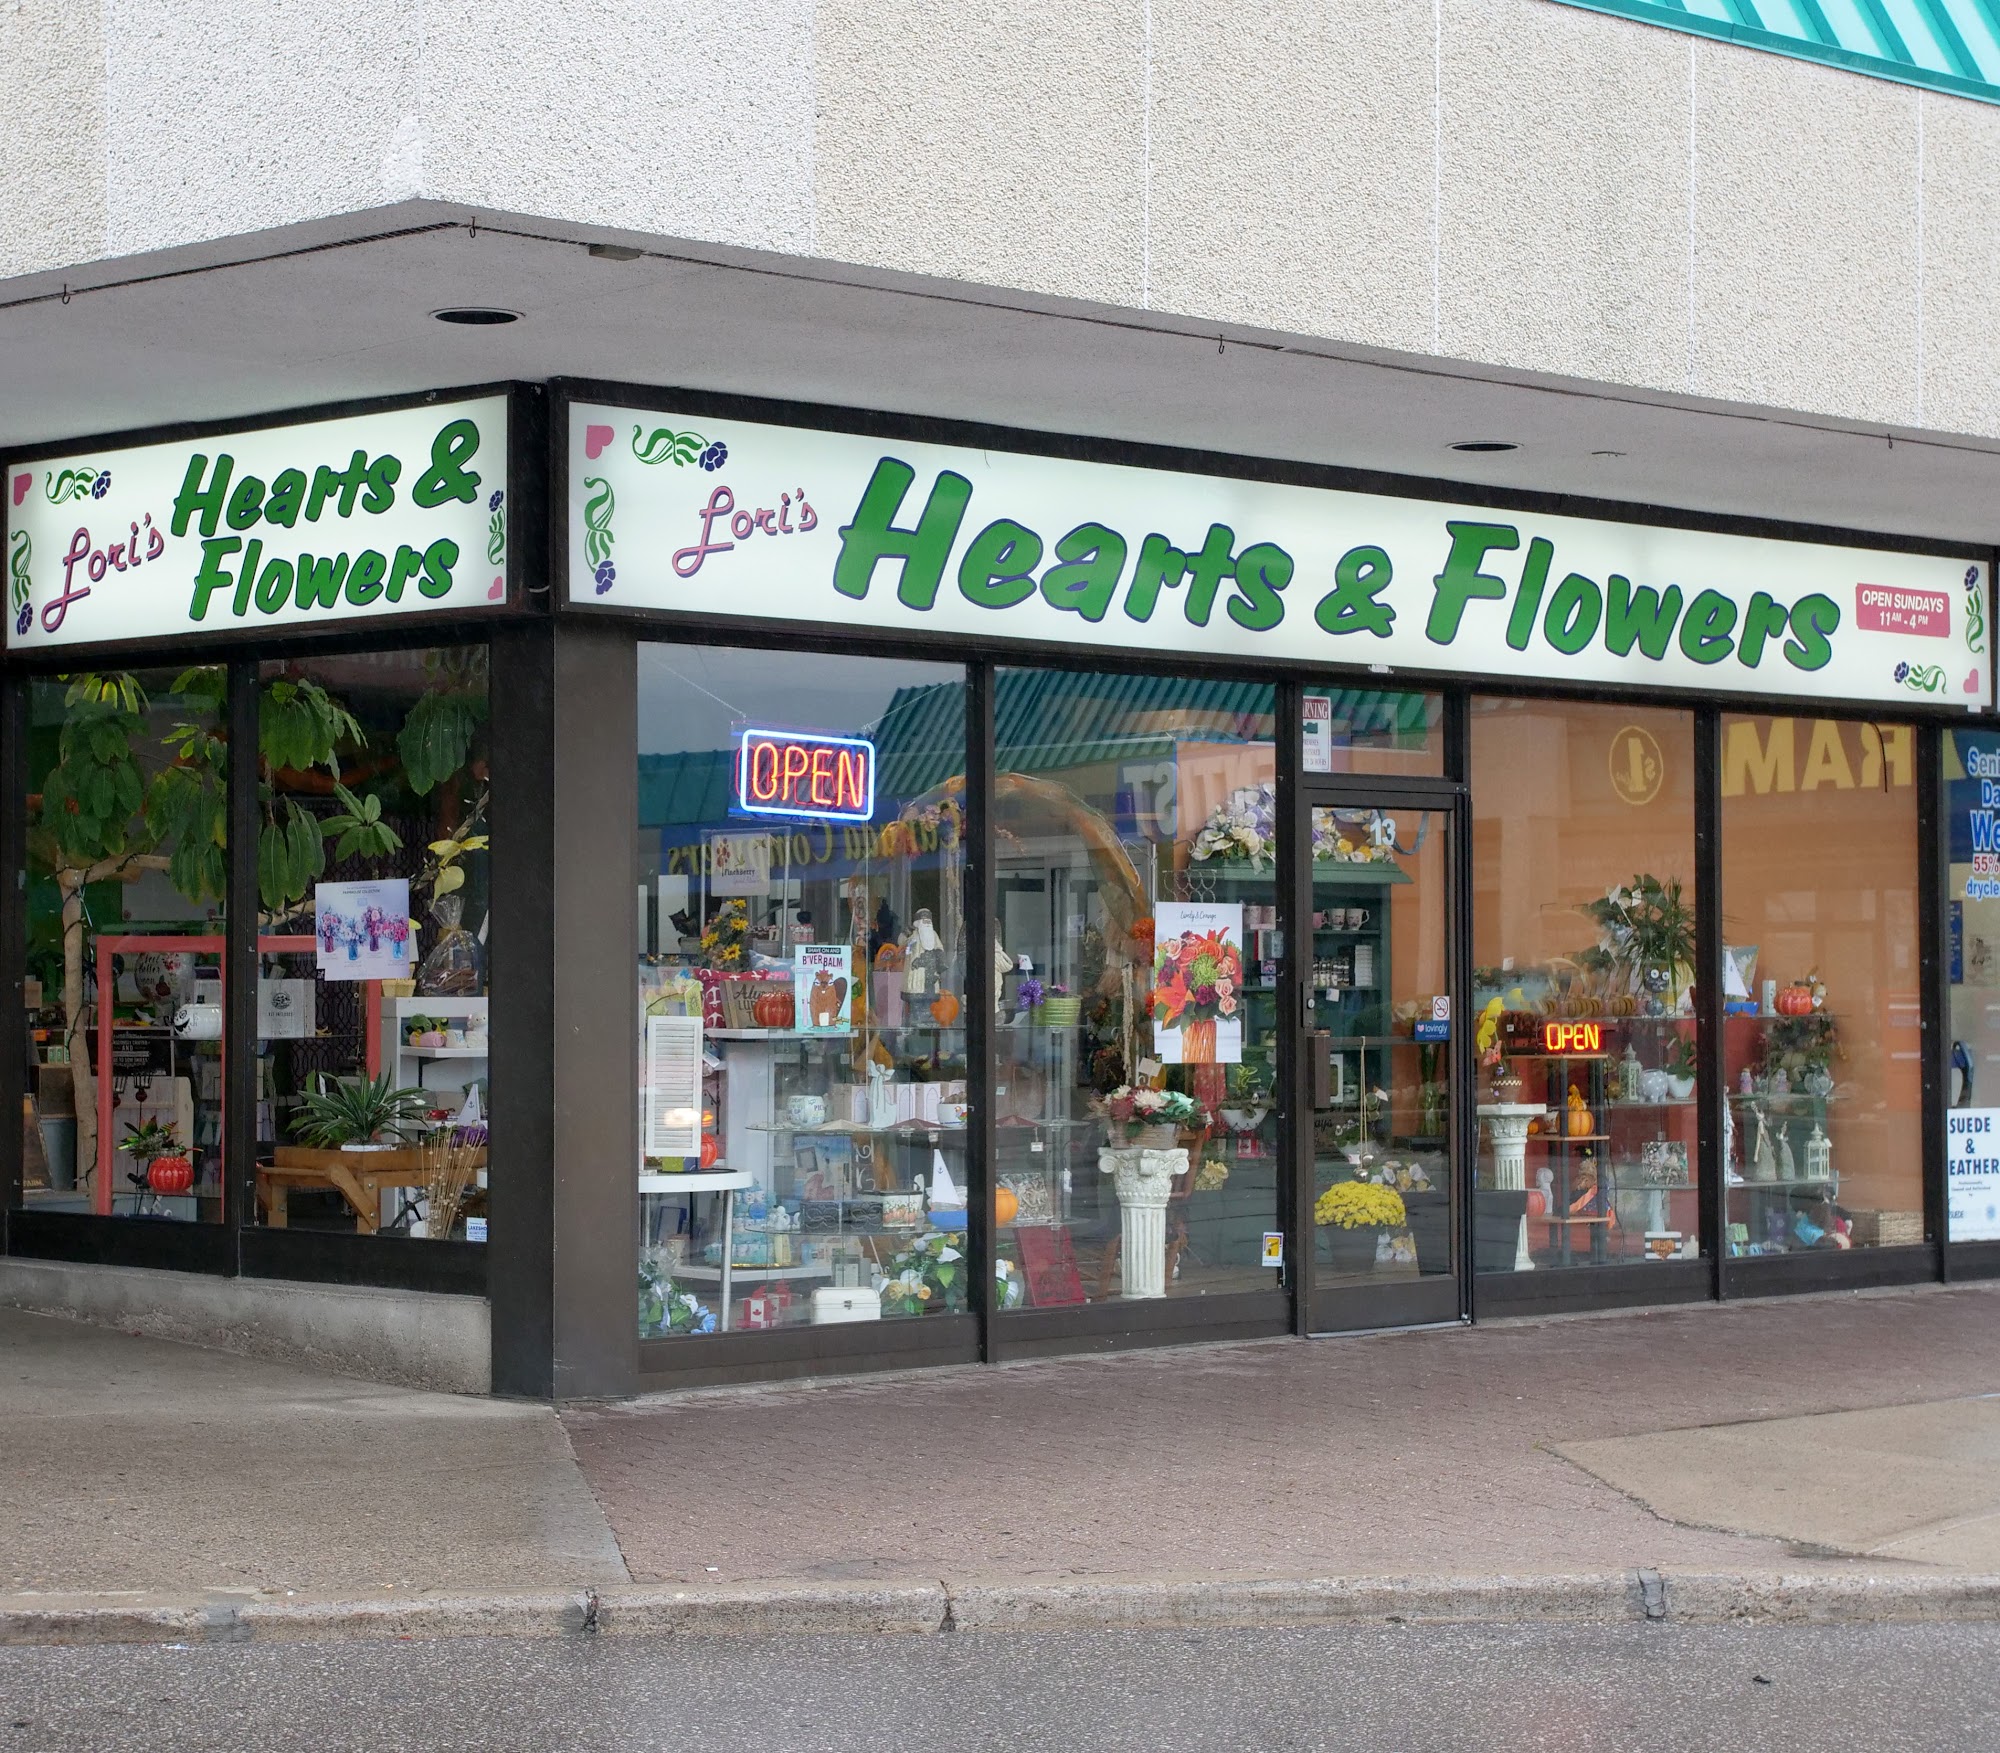 Lori's Hearts and Flowers